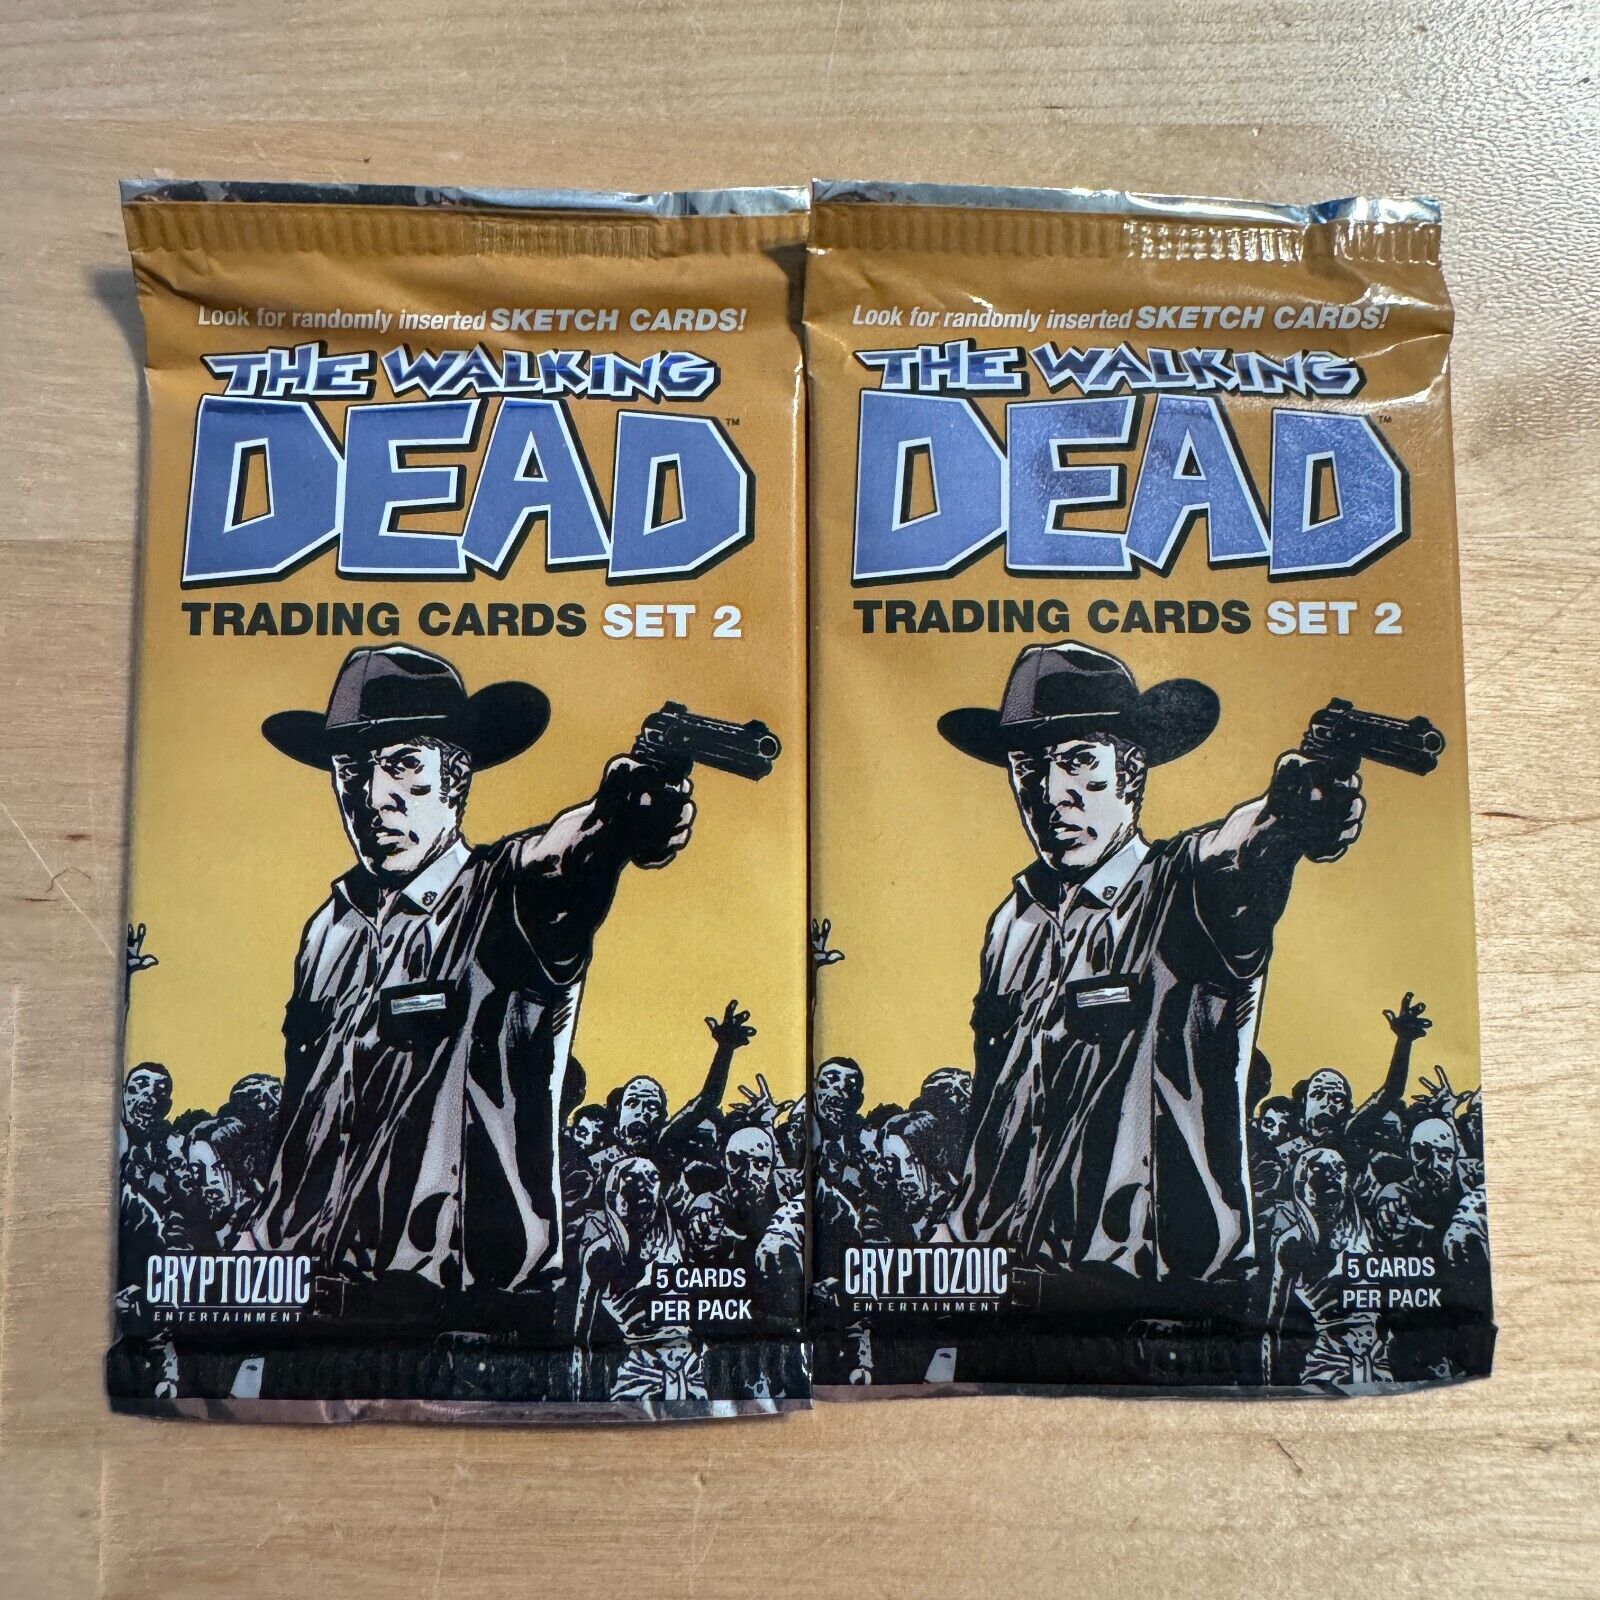 The Walking Dead Comic Trading Cards Set 2.  Unopened Blister Pack - Set of 2